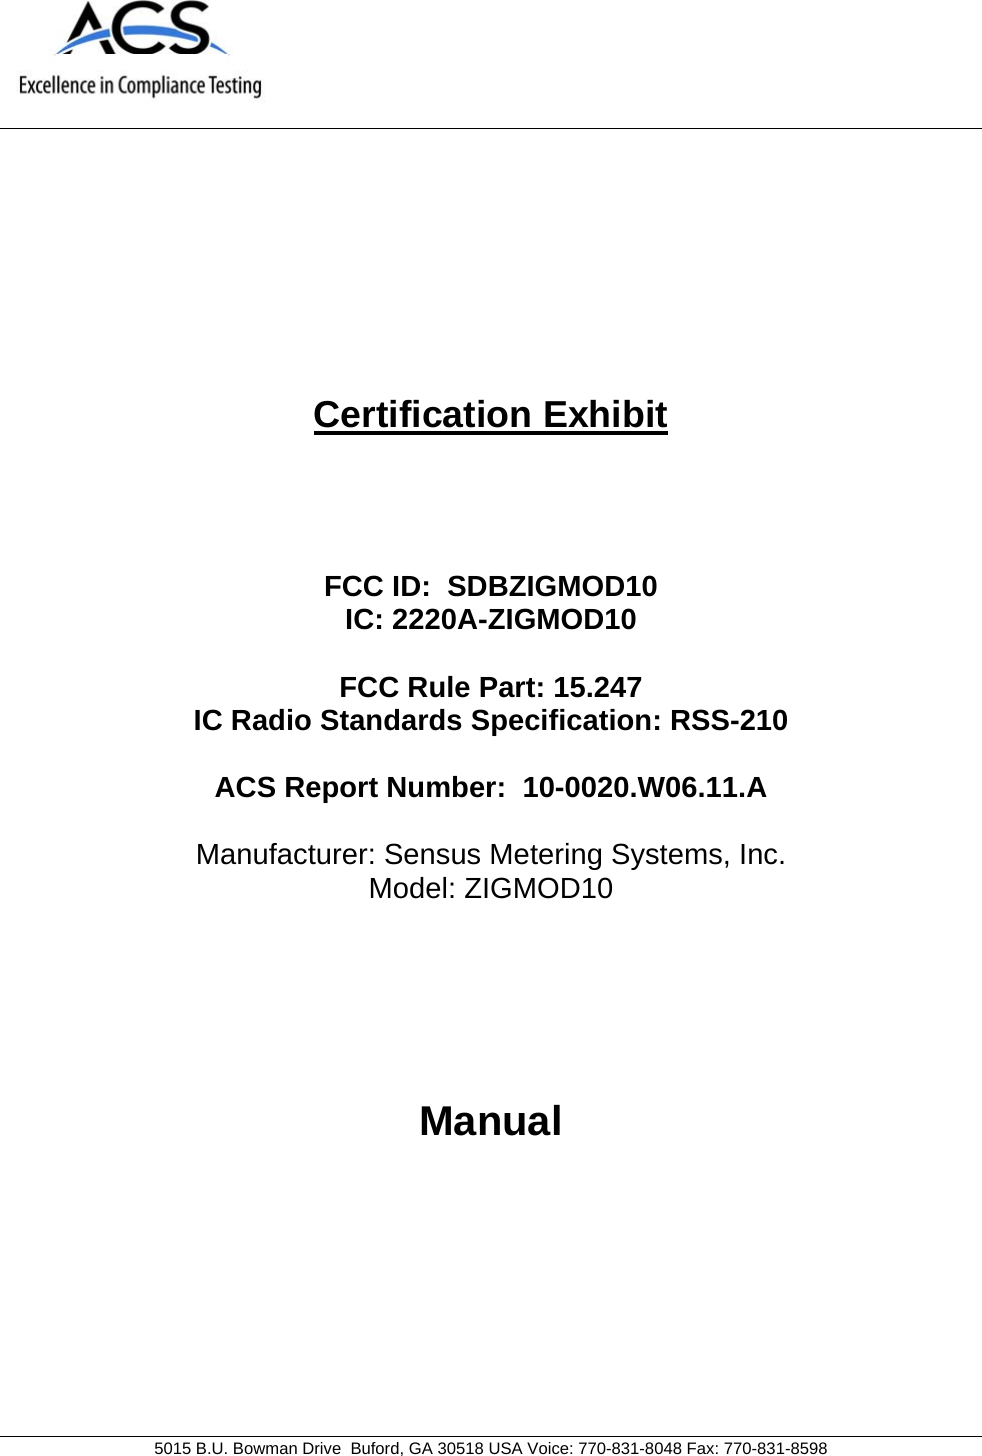     5015 B.U. Bowman Drive  Buford, GA 30518 USA Voice: 770-831-8048 Fax: 770-831-8598   Certification Exhibit     FCC ID:  SDBZIGMOD10 IC: 2220A-ZIGMOD10  FCC Rule Part: 15.247 IC Radio Standards Specification: RSS-210  ACS Report Number:  10-0020.W06.11.A  Manufacturer: Sensus Metering Systems, Inc. Model: ZIGMOD10     Manual  